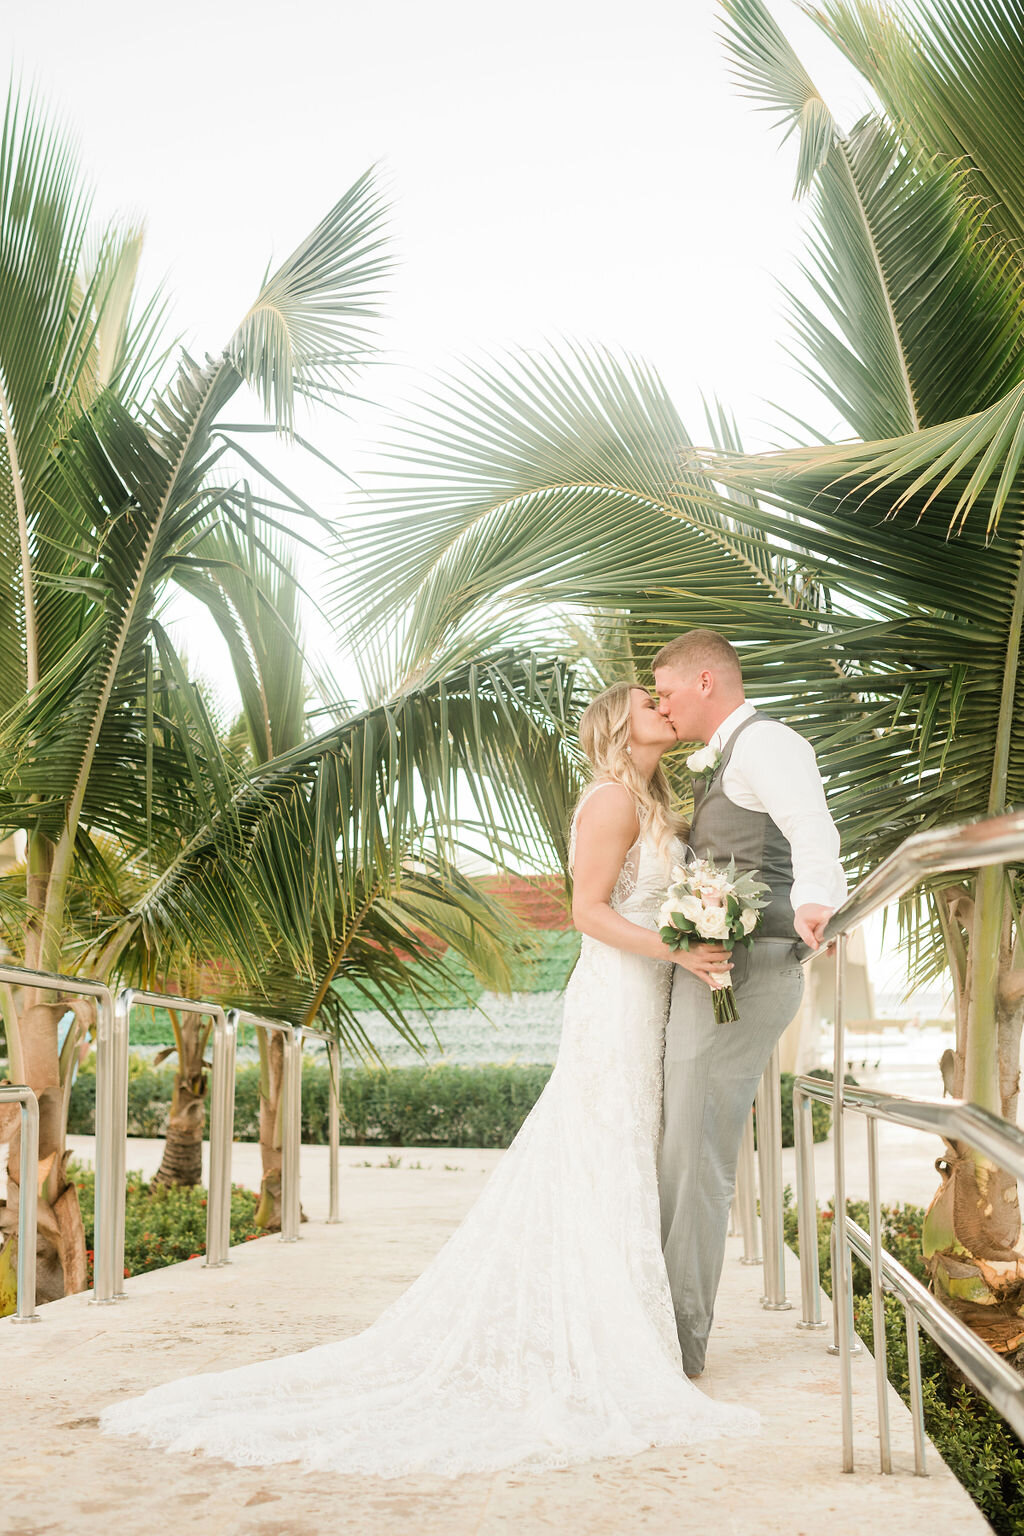 Bride and groom kissing under a palm tree